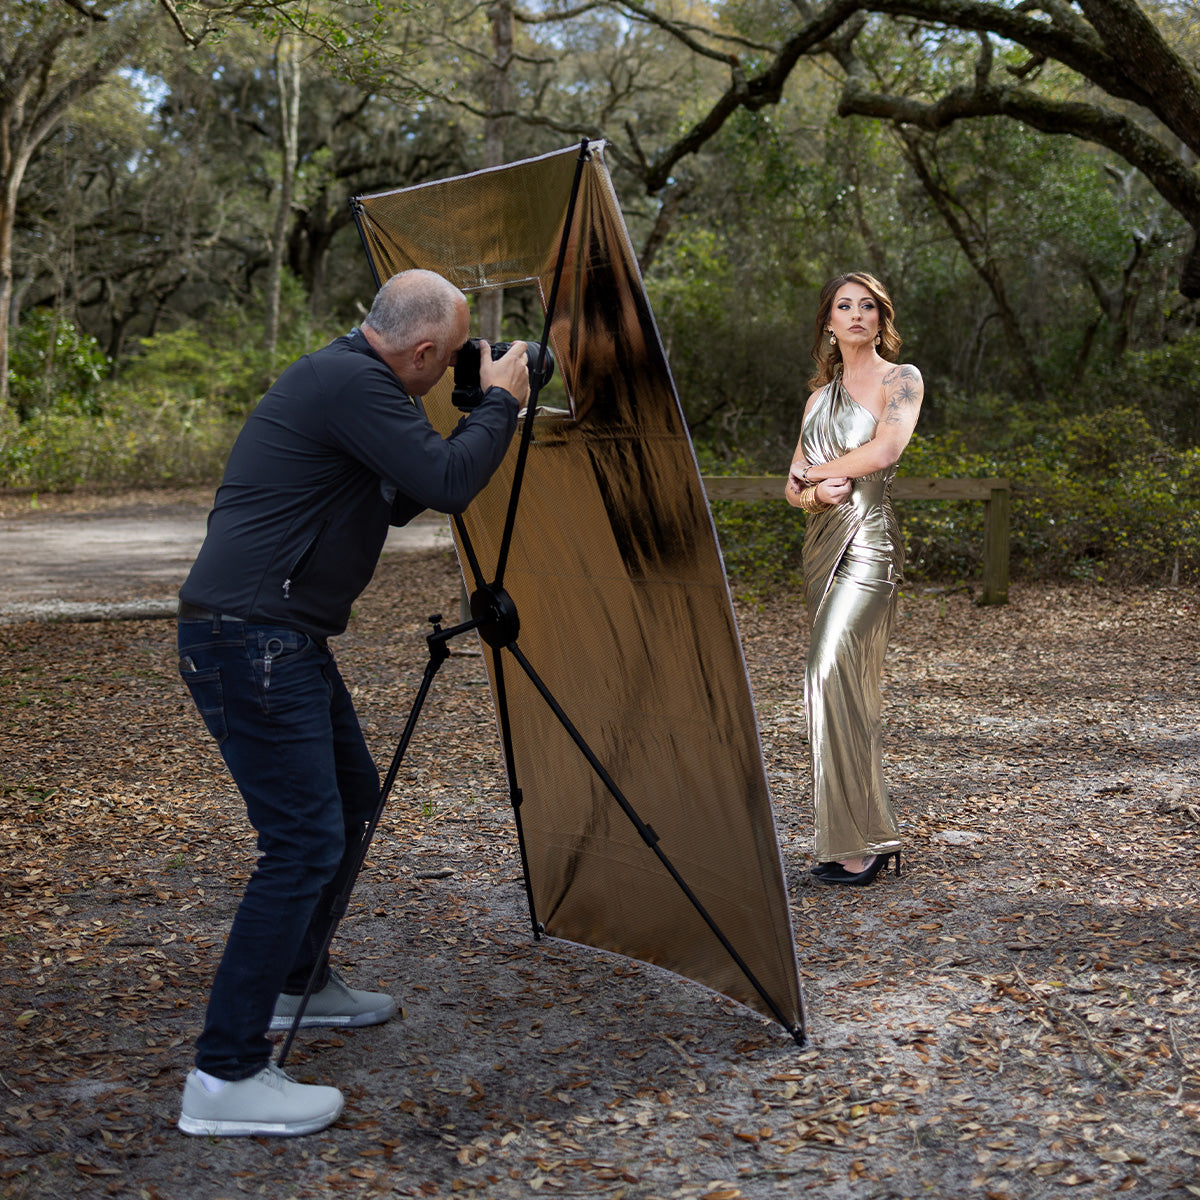 Model being photographed by Sal Cincotta using the Fusion light control system silver shoot-through reflective panel